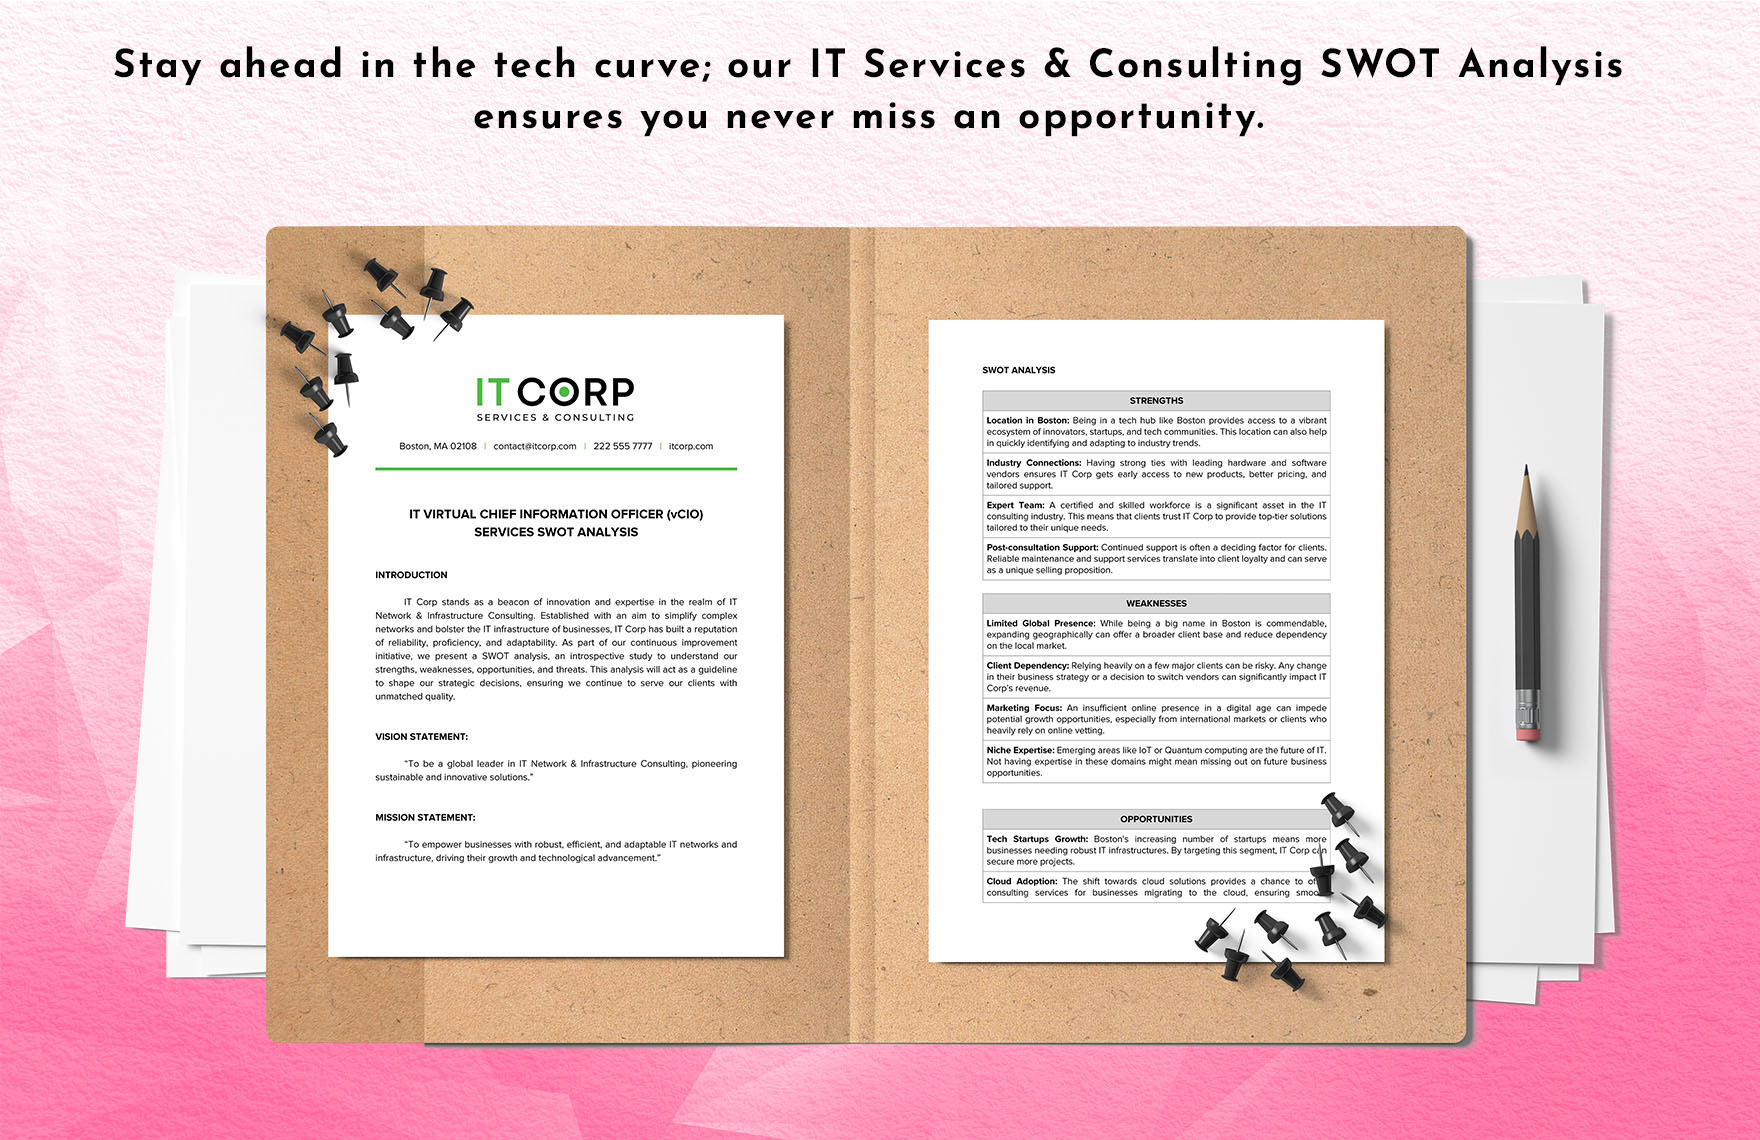 IT Virtual Chief Information Officer (vCIO) Services SWOT Analysis Template